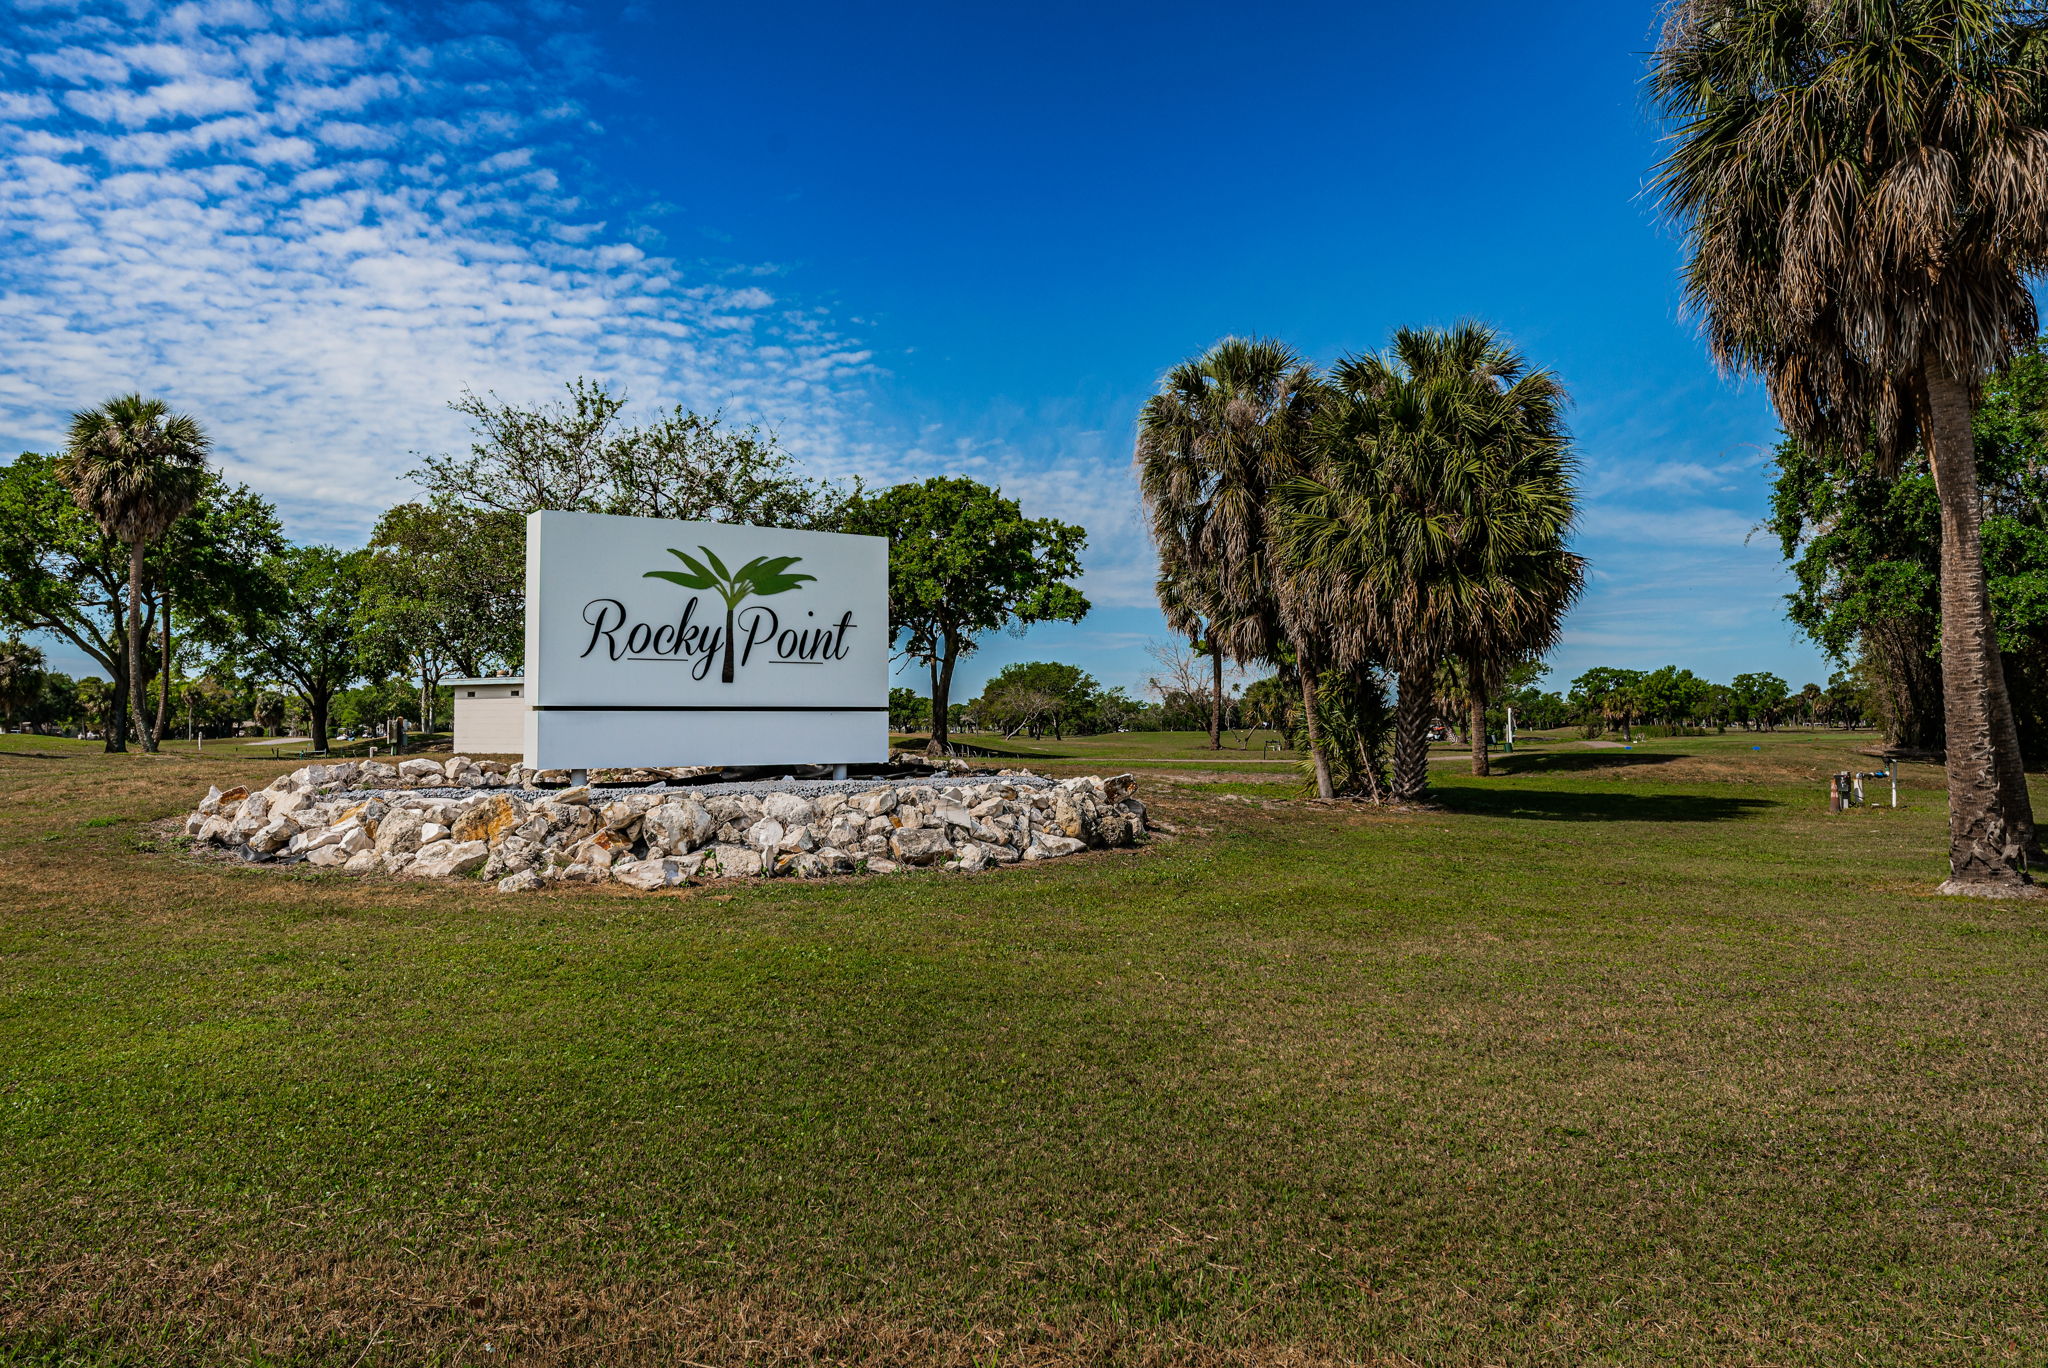 1-Rocky Point Golf Course Sign